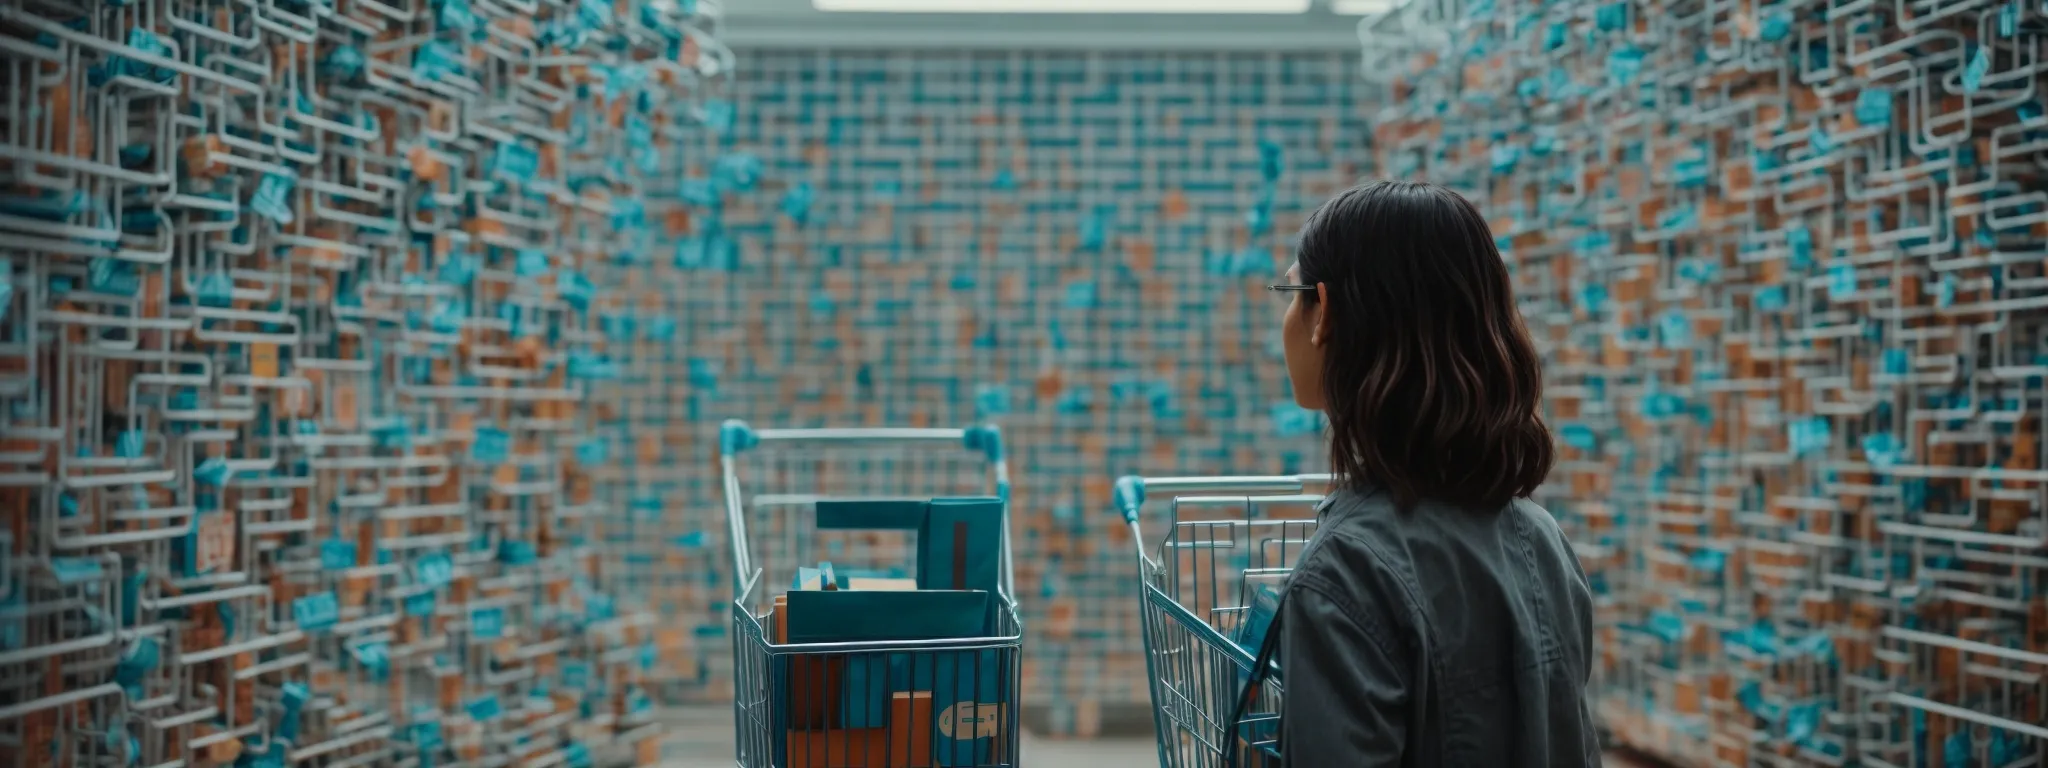 a person contemplating a maze-like shopping cart filled with seo-related icons representing the stages of the buyer's journey.